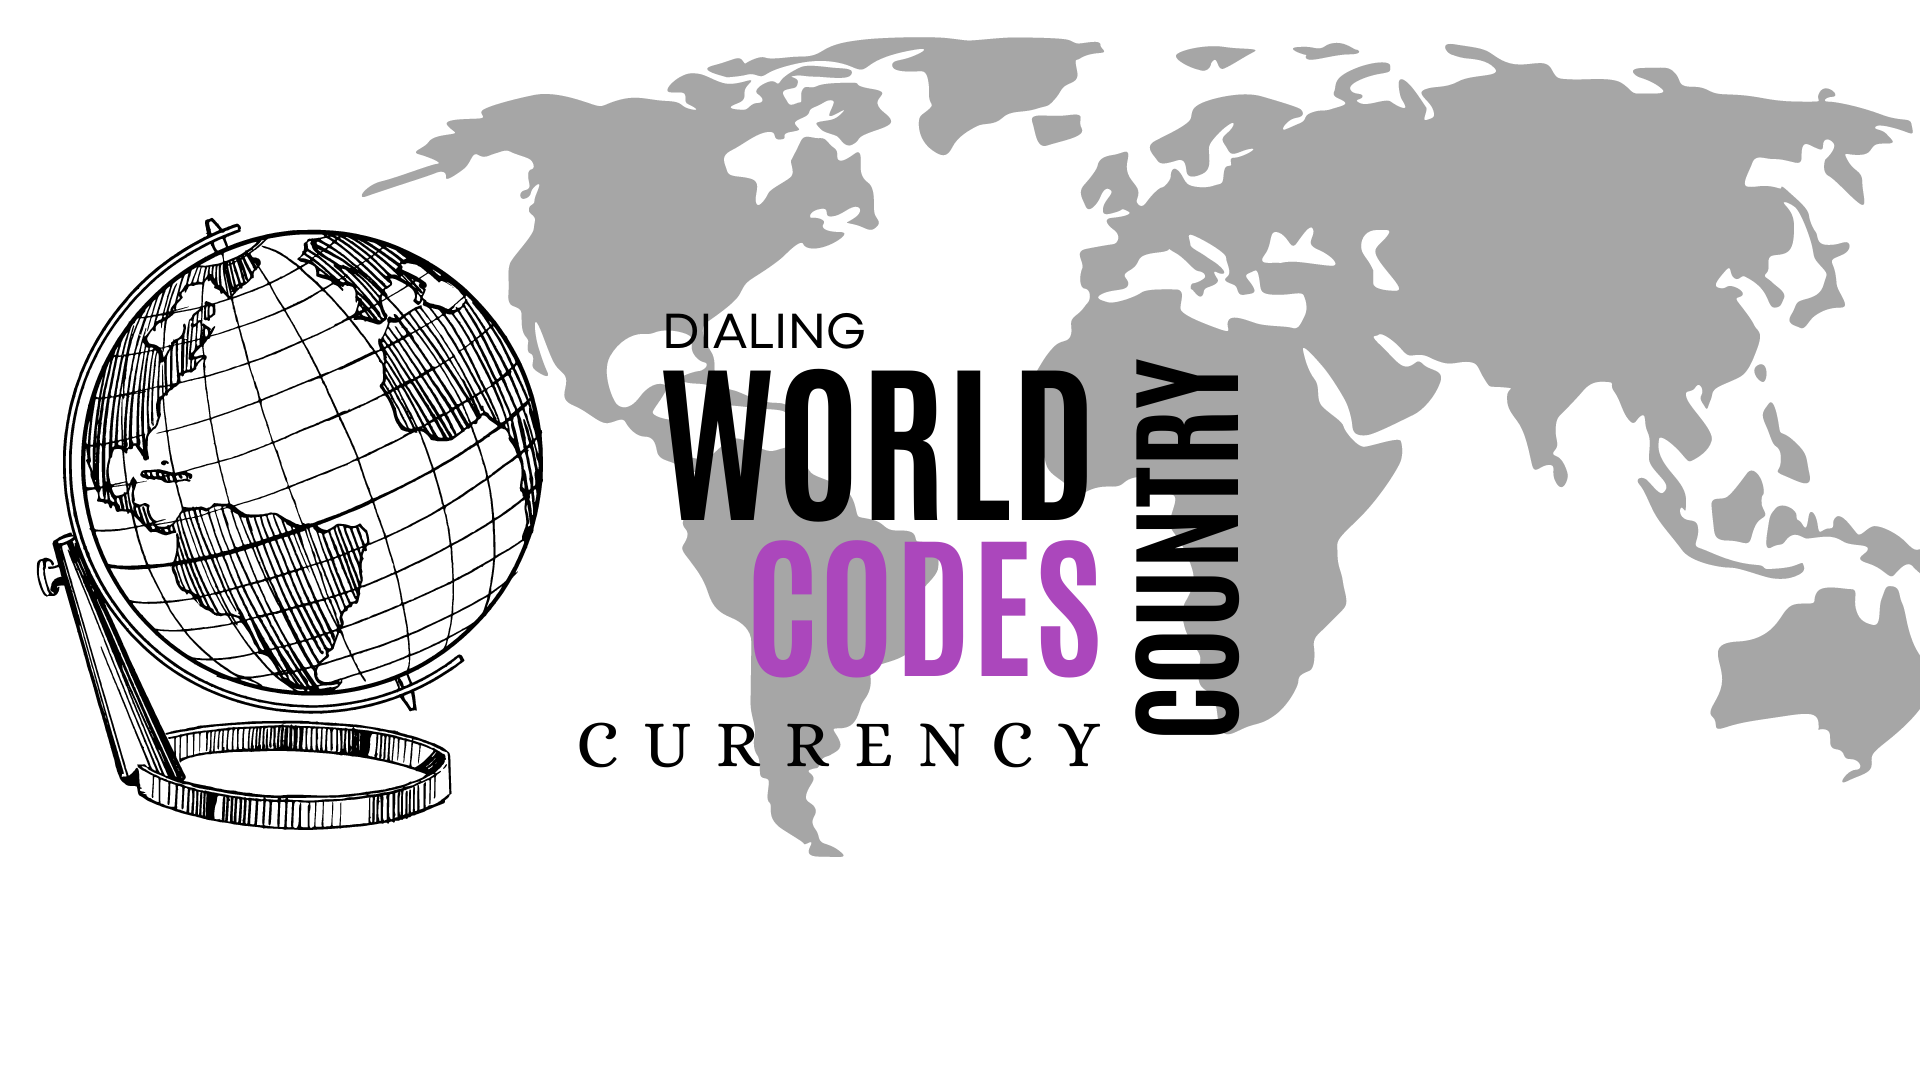 The List of Country Codes, Dialing Codes and Currency Codes